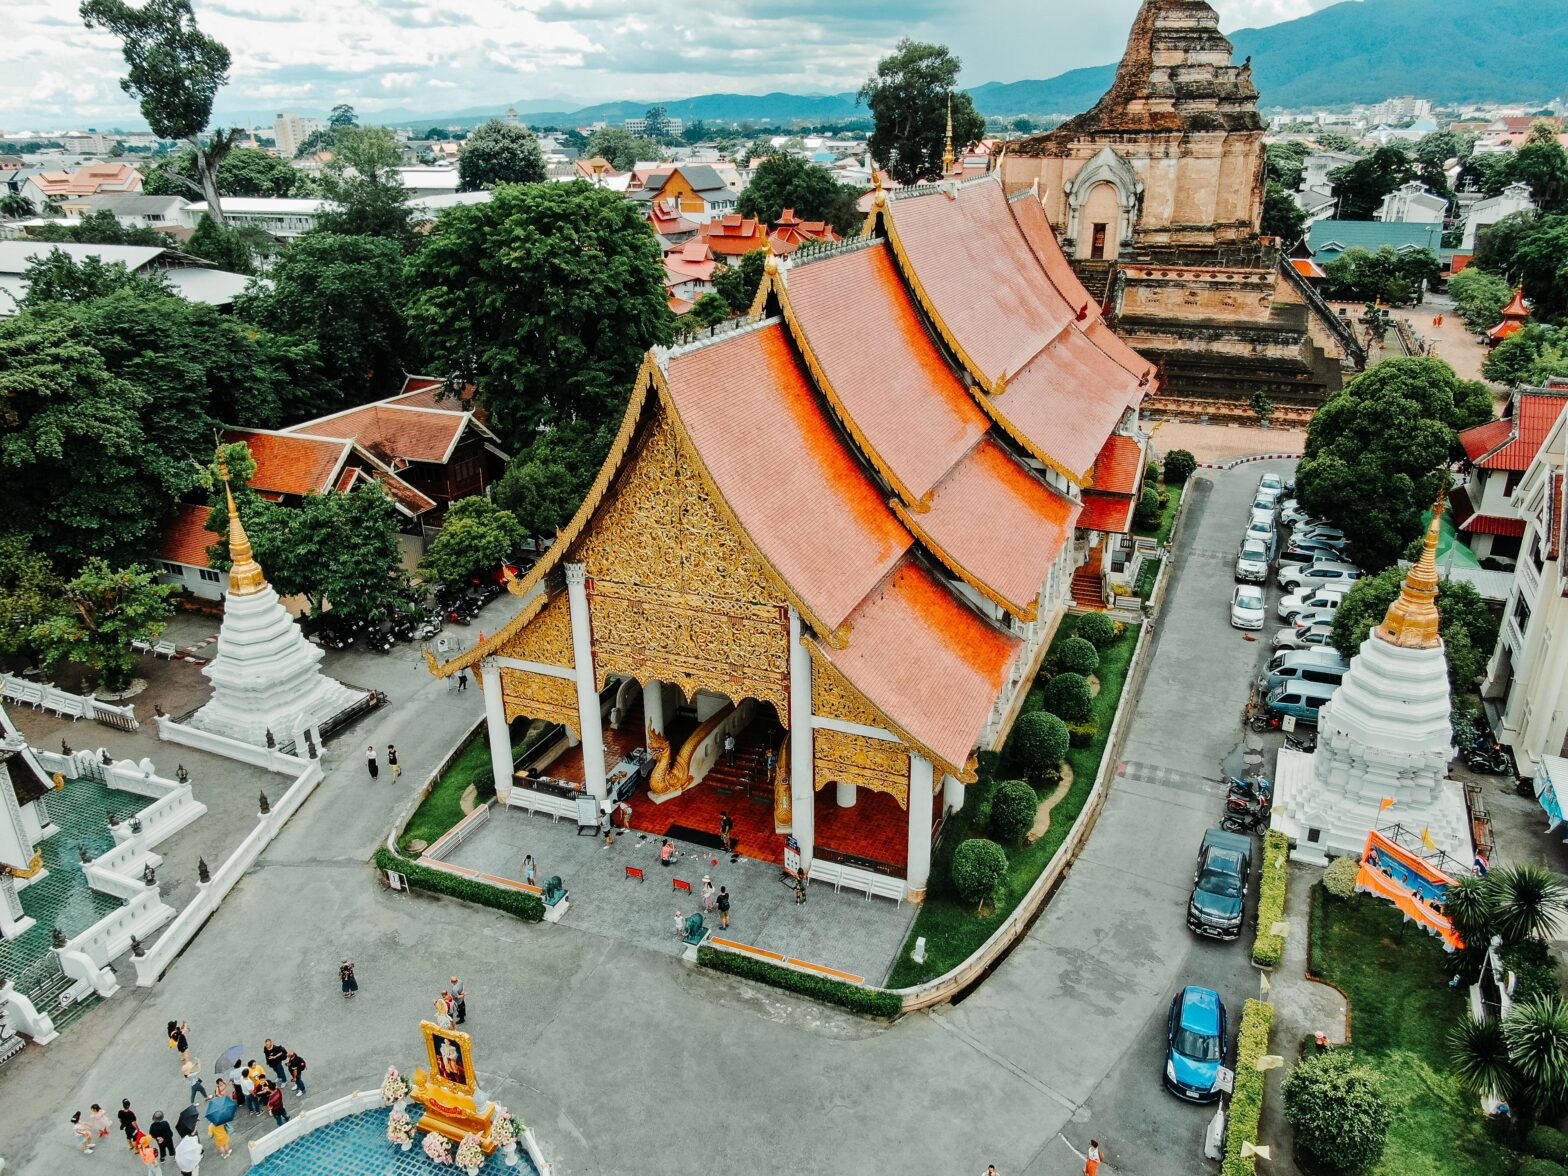 Architectural Design Of An Orange Temple in Chiang Mai Thailand